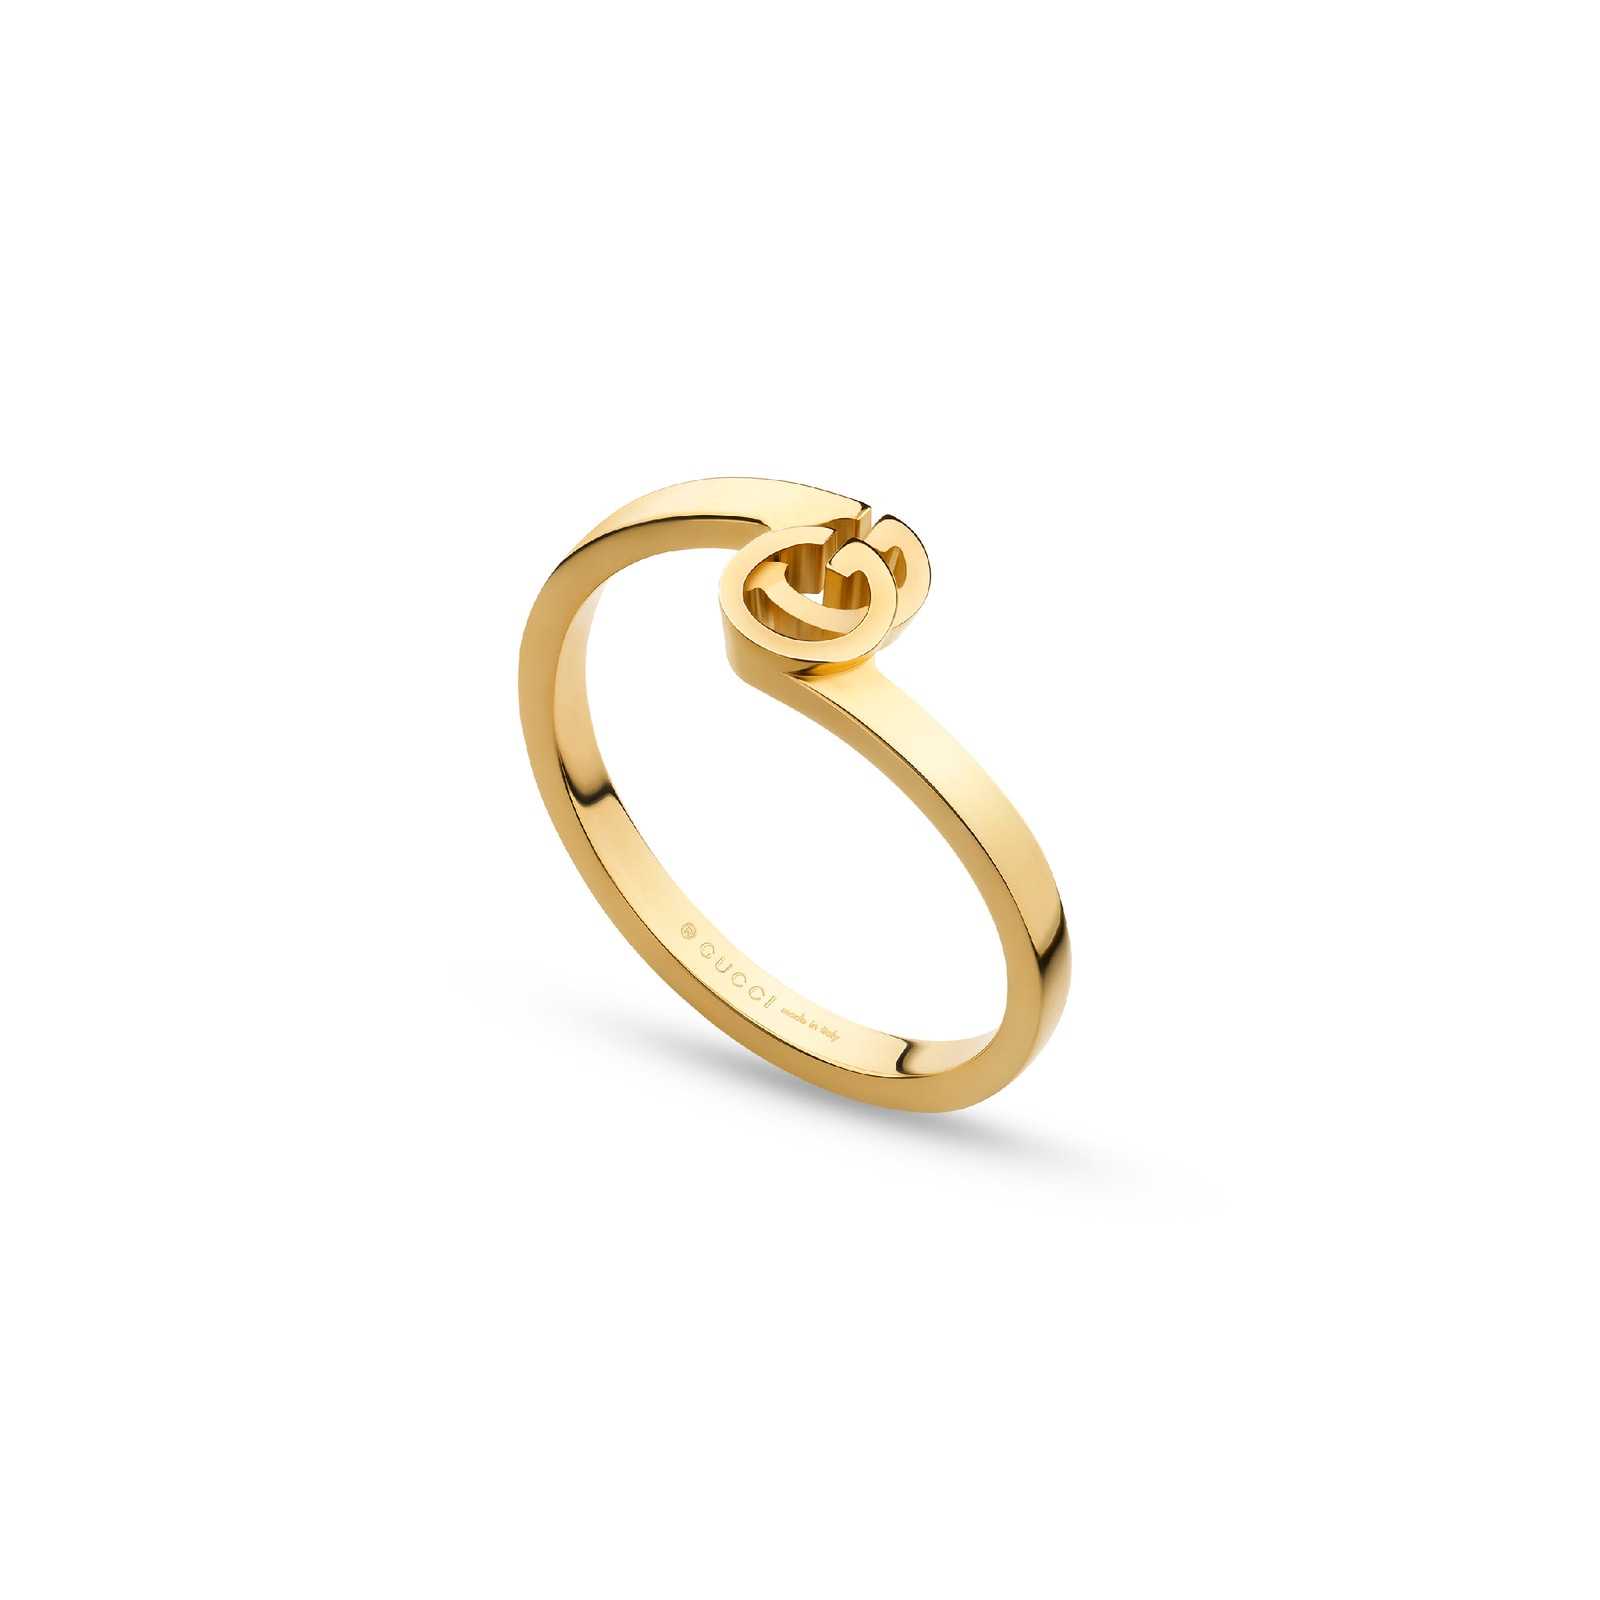 Running G Ring In 18ct Yellow Gold - Ring Size N